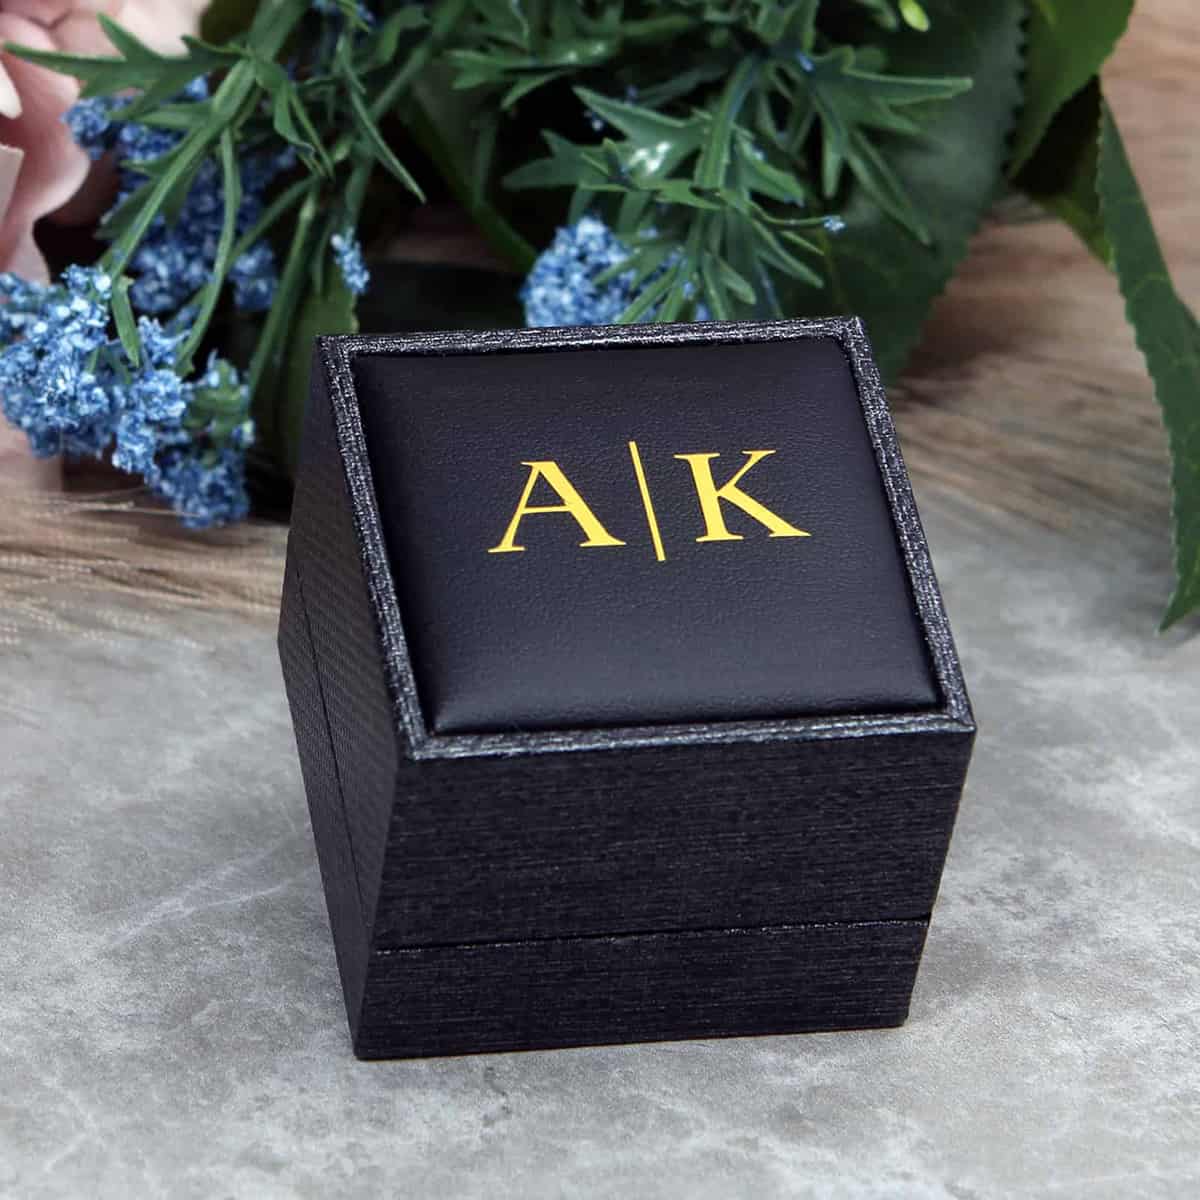 Custom monogrammed ring box for proposal with gold lettering